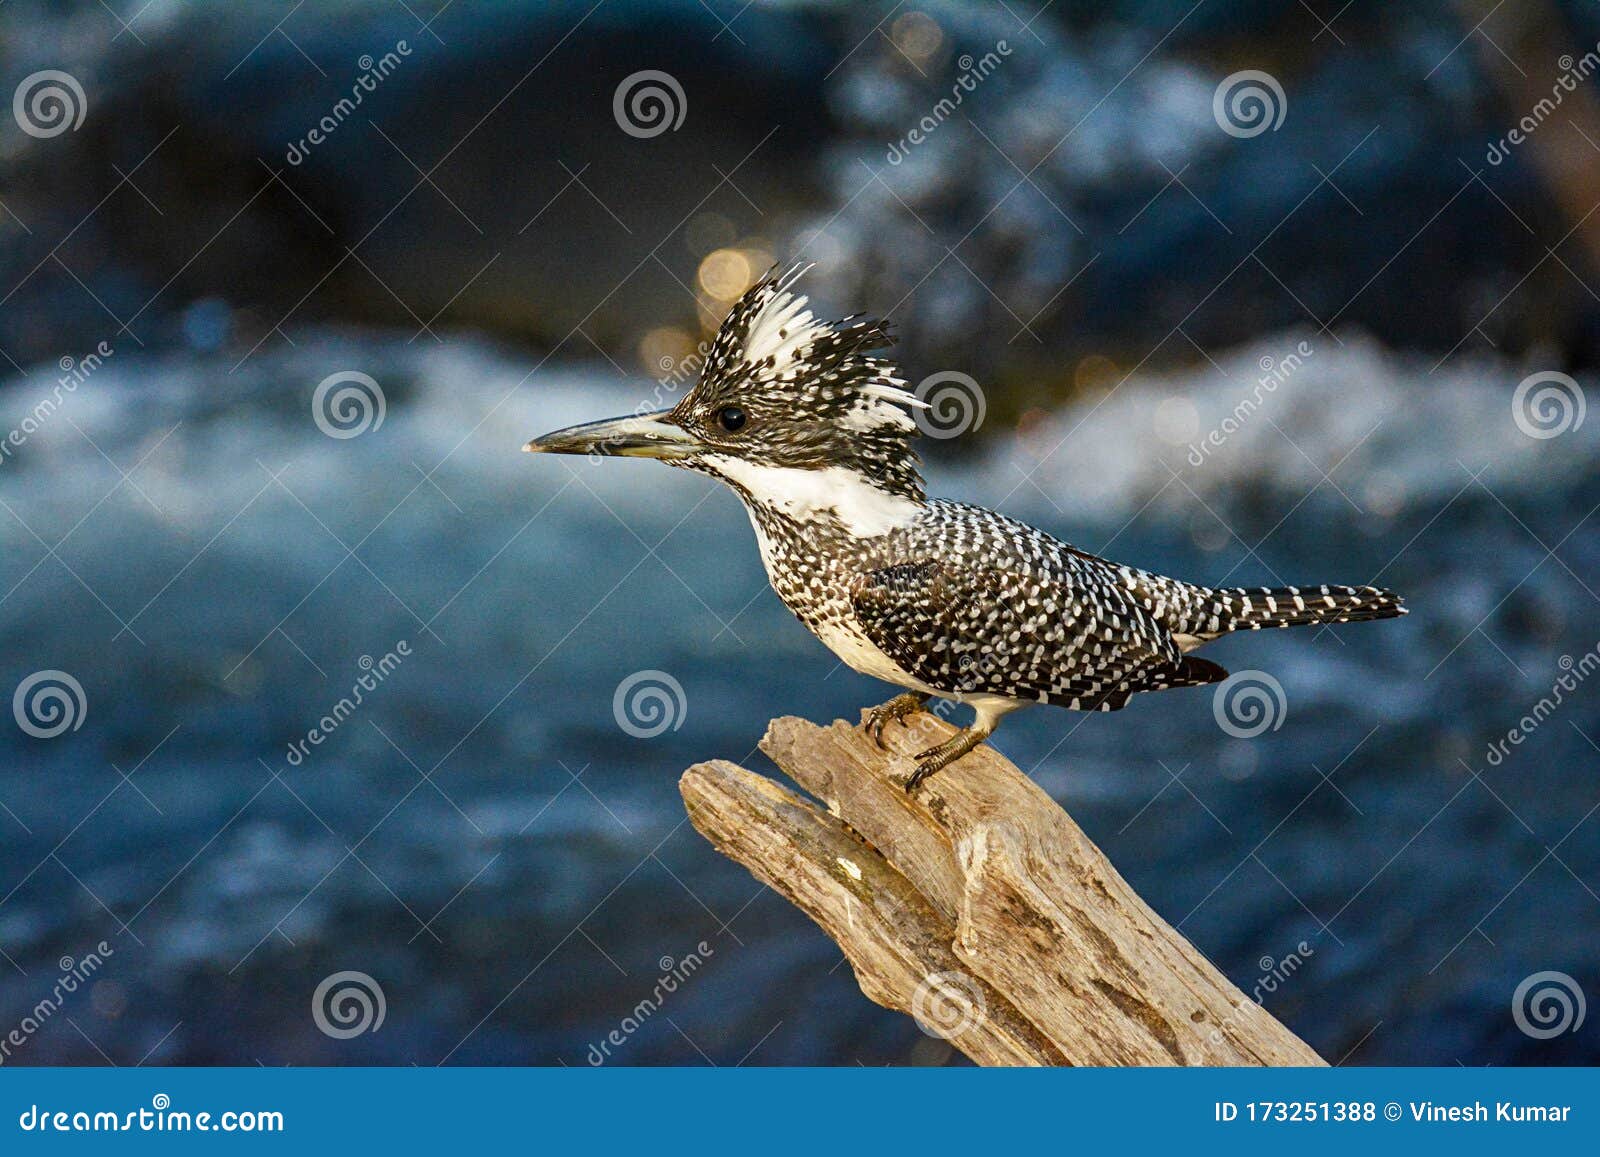 megaceryle lugubris: crested kingfisher perching on tree log in the forest of jim corbett natinal park, india